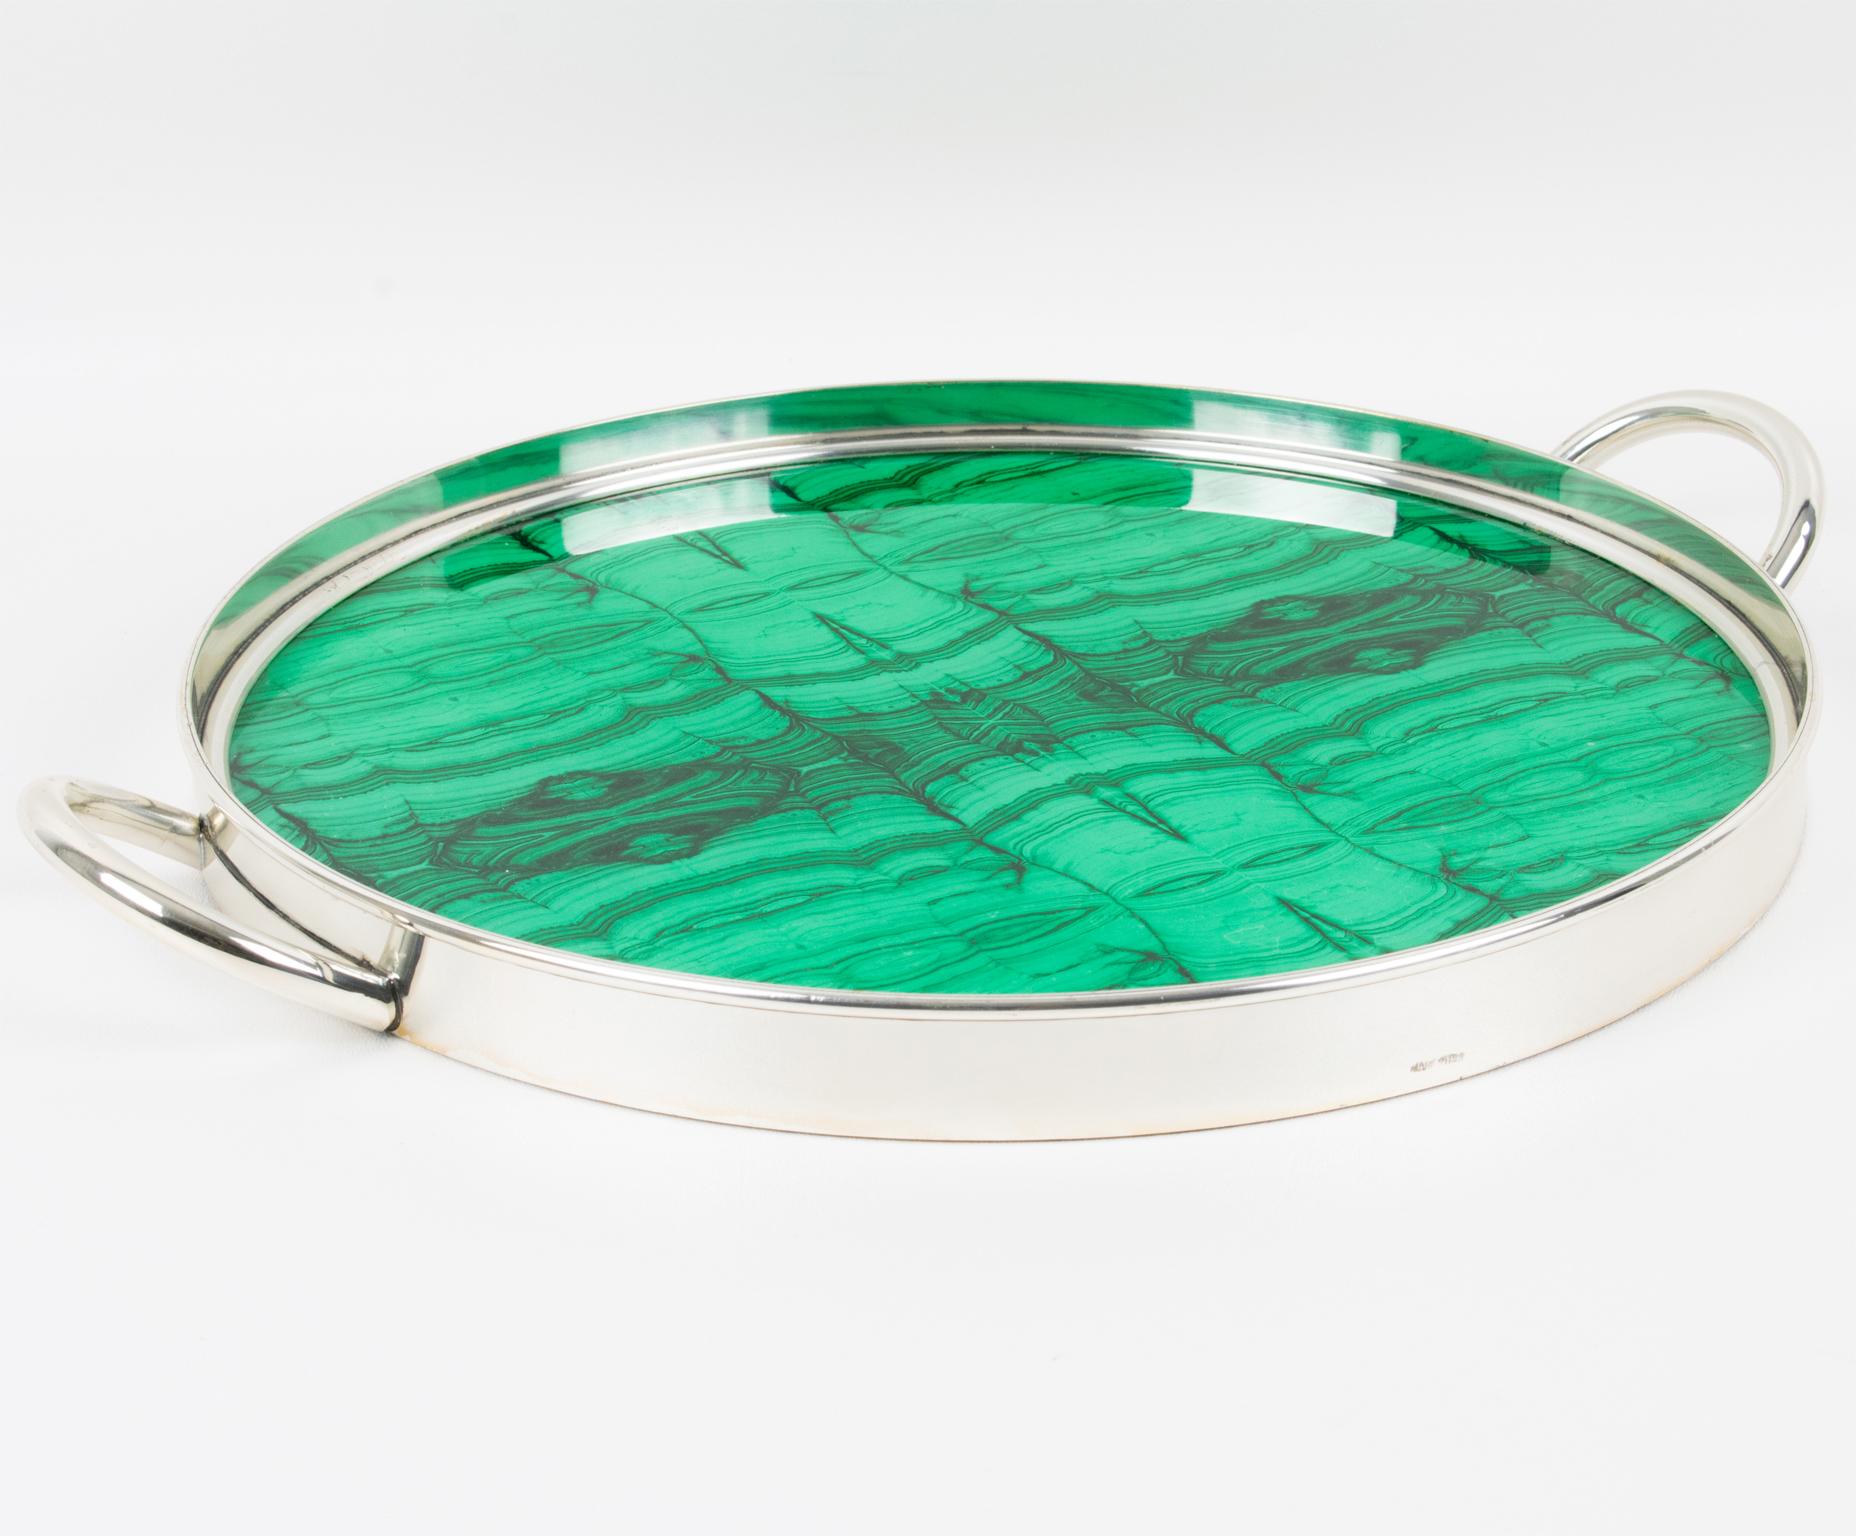 Mid-Century Modern Italian Modernist Silver Plate and Malachite-like Serving Tray, 1970s